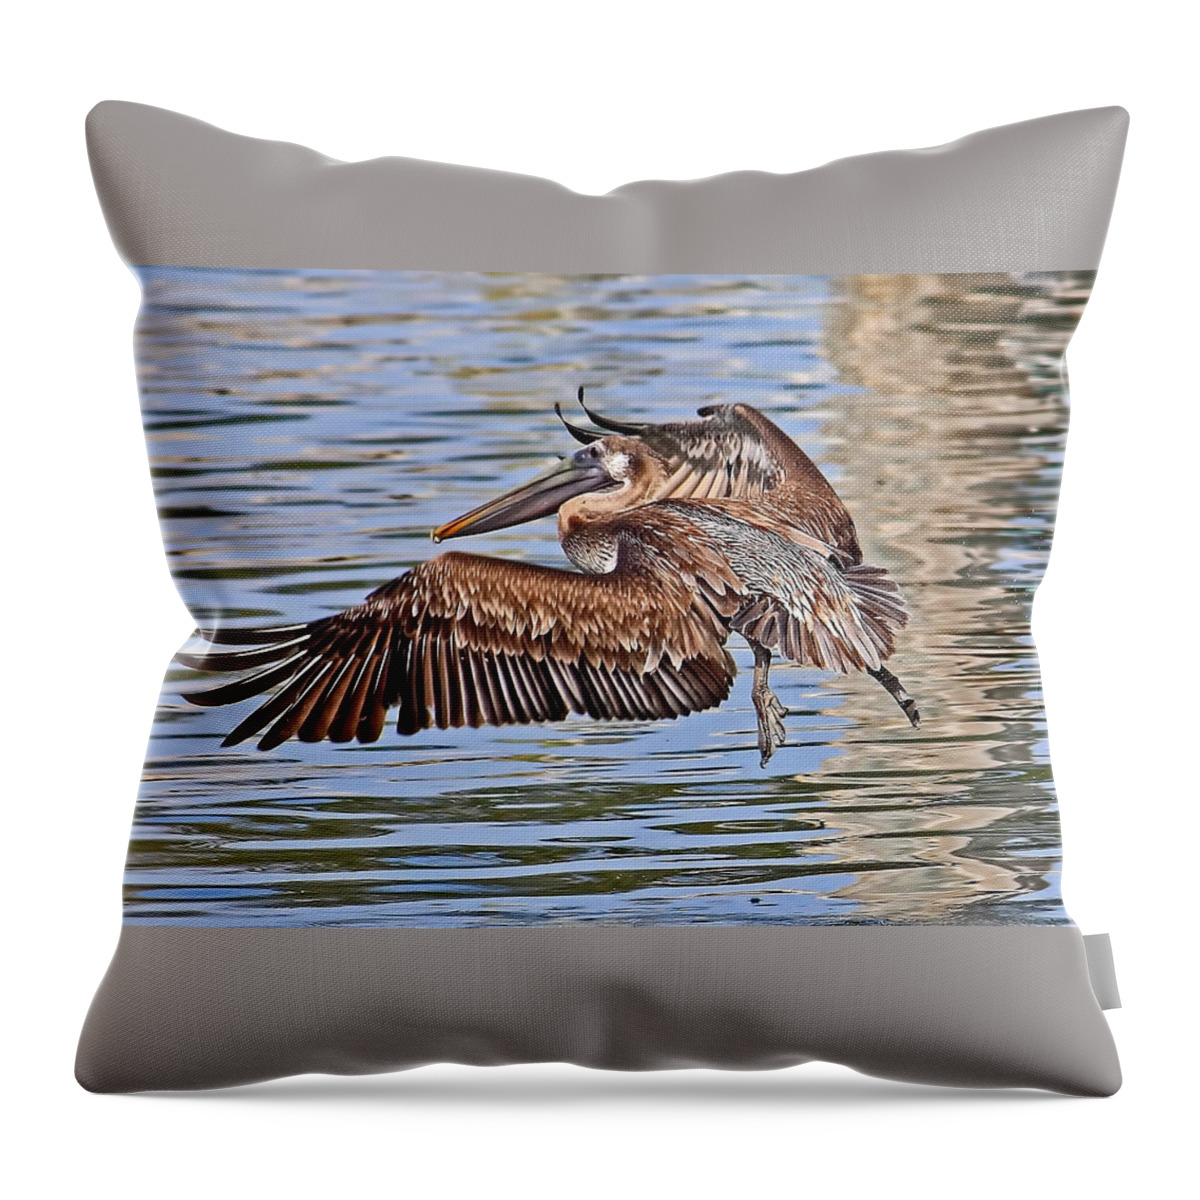 Brown Pelican Throw Pillow featuring the photograph Water Ballet - Brown Pelican by HH Photography of Florida